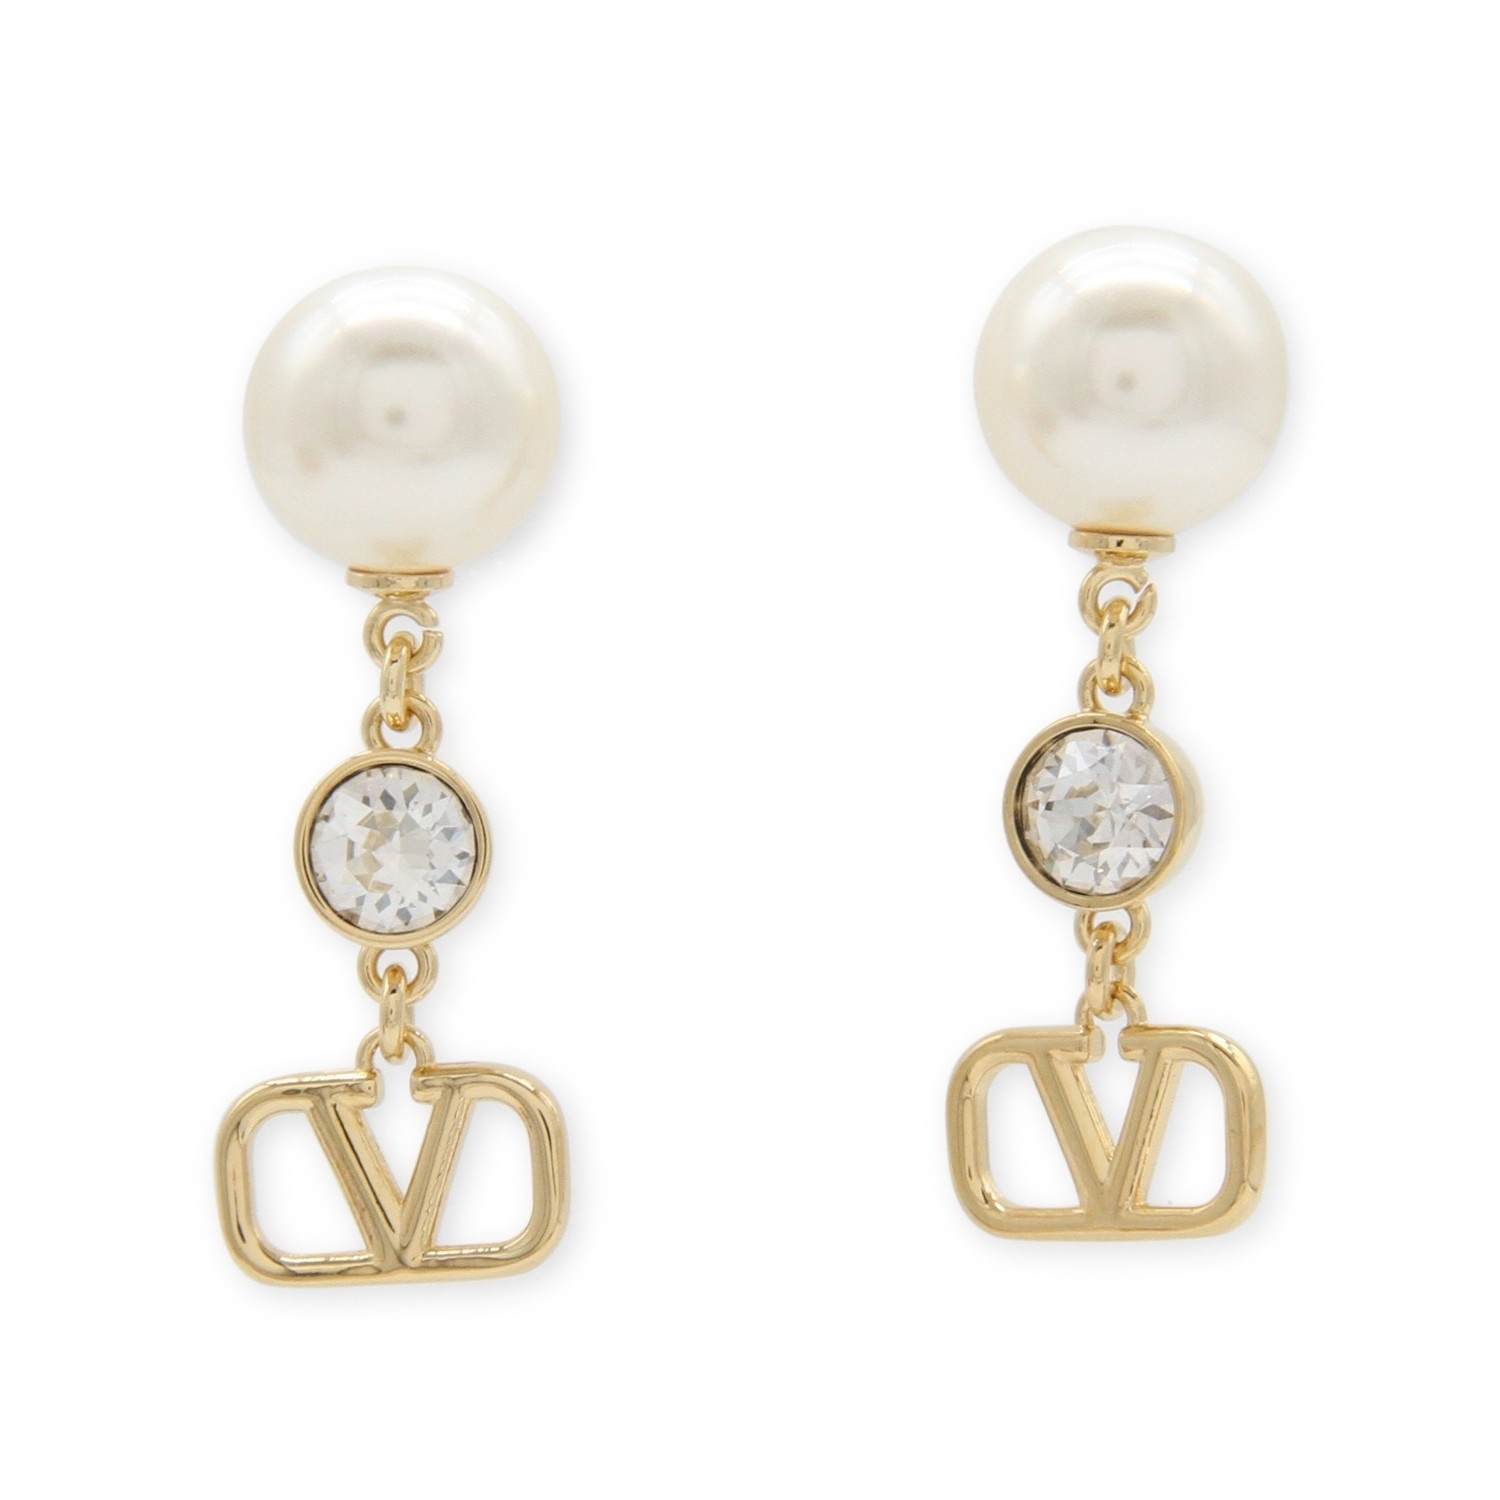 GOLD METAL AND PEARL VLOGO SIGNATURE EARRINGS - 1